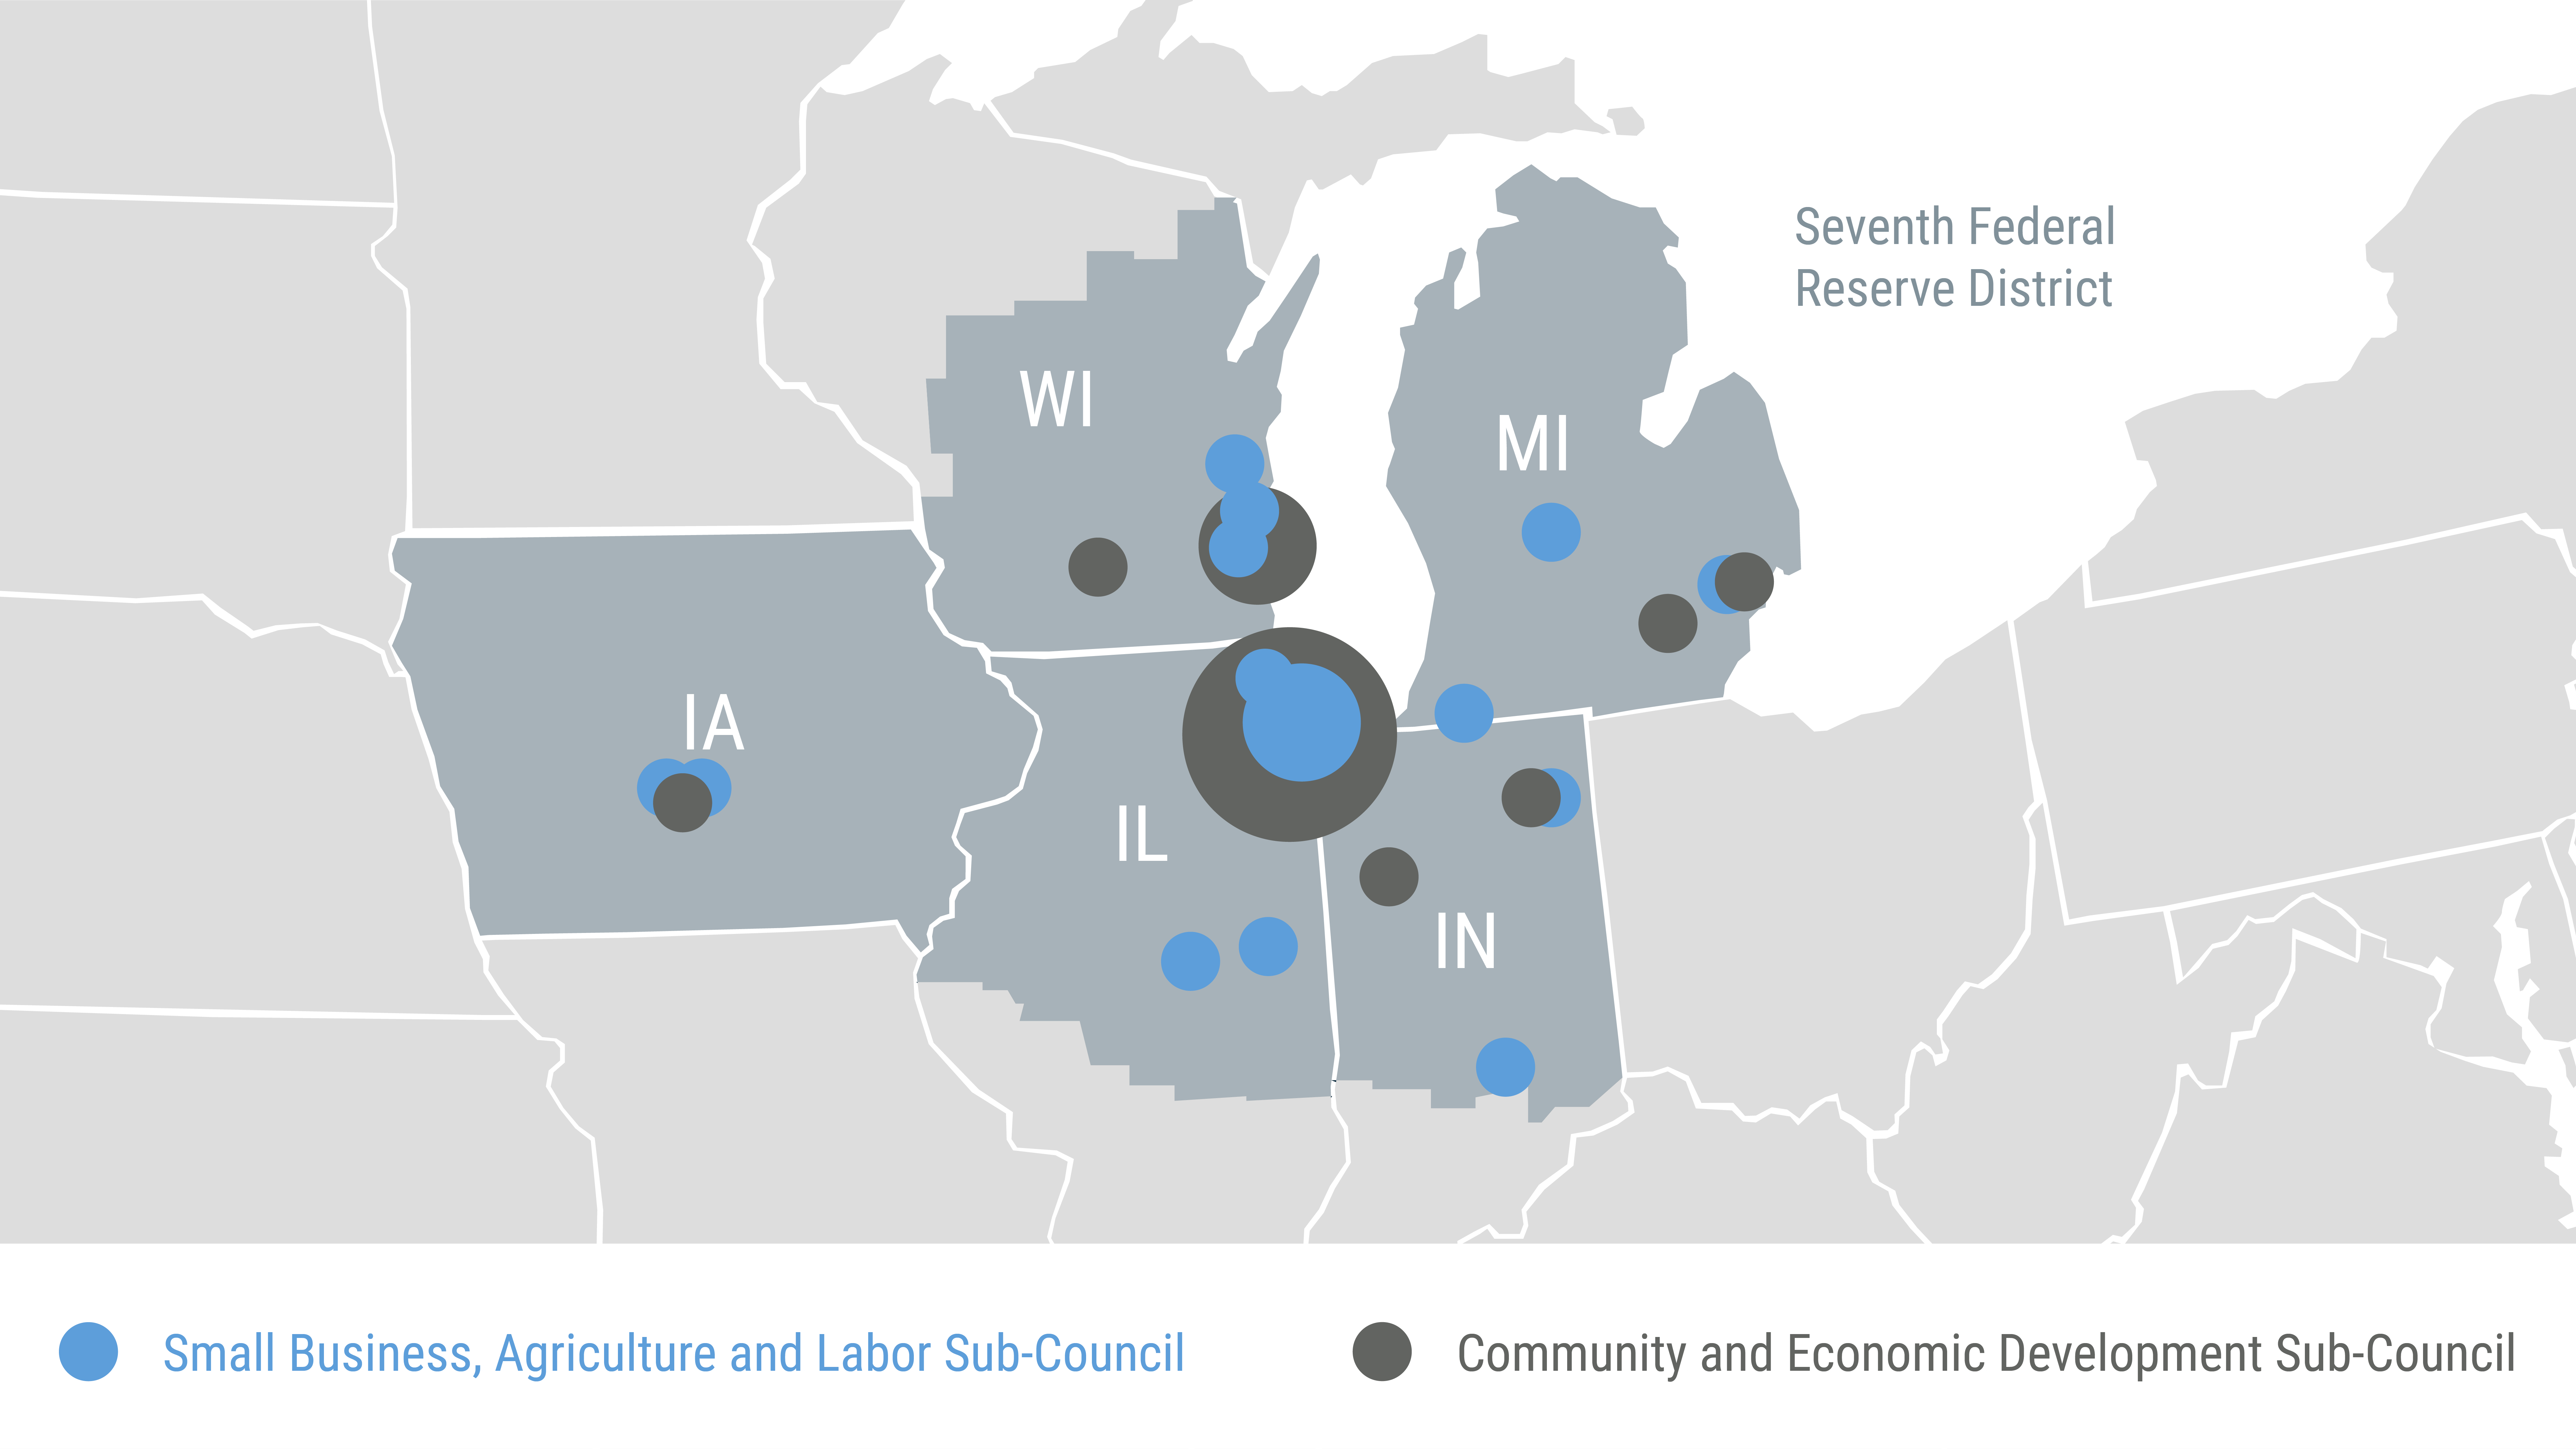 A map of the 7th Federal Reserve District showing the locations of members of the Chicago Fed's Advisory Council on Small Business, Community and Economic Development, Agriculture and Labor.